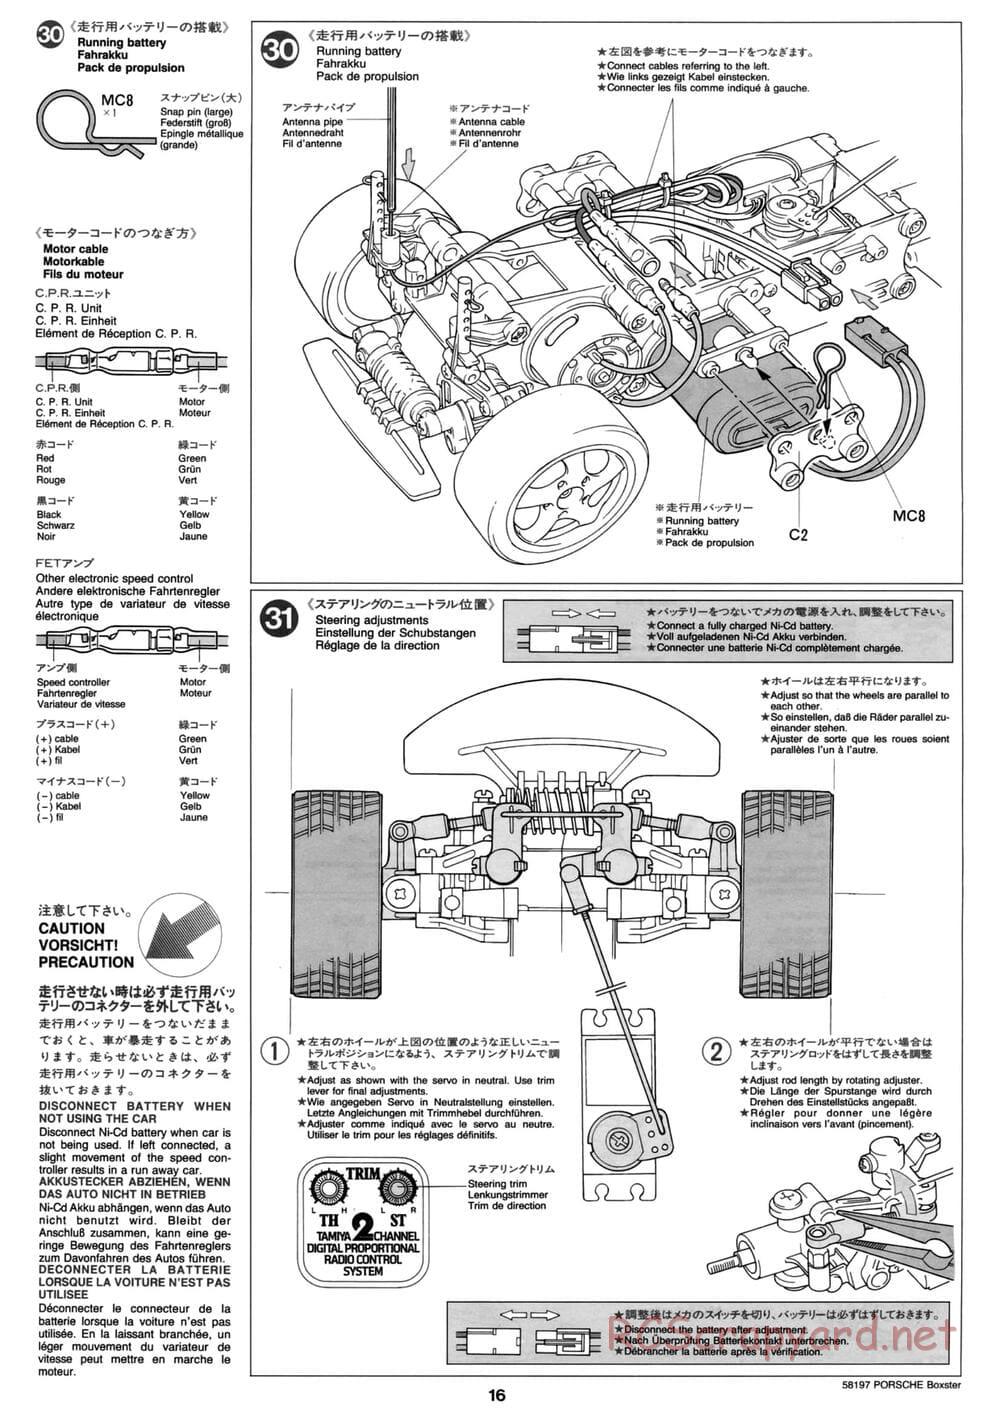 Tamiya - Porsche Boxster - M02L Chassis - Manual - Page 16